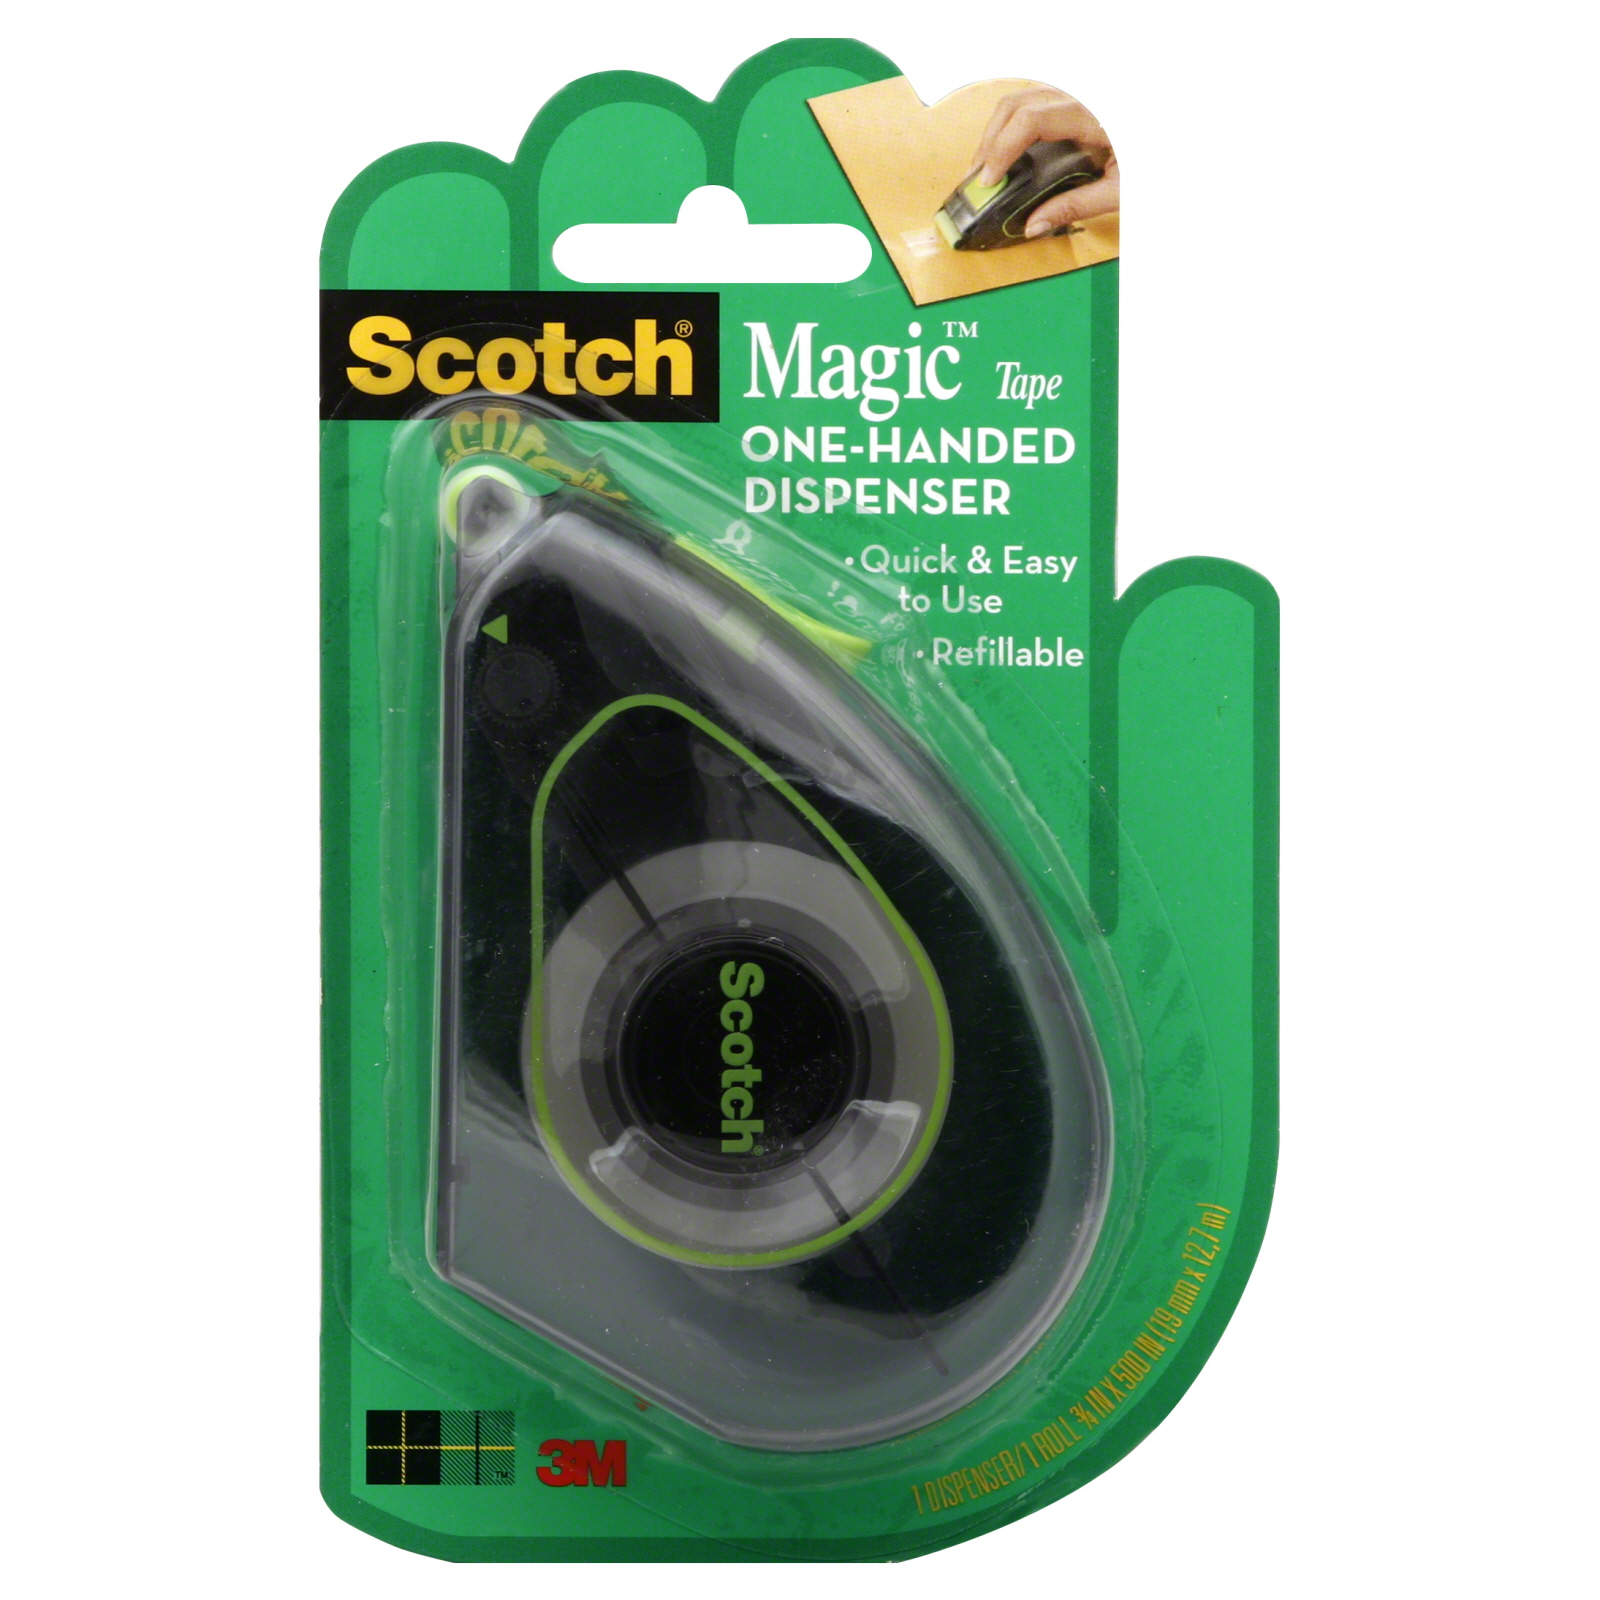 3M 3230941 Scotch Magic Tape One Handed Dispenser With Tape Roll